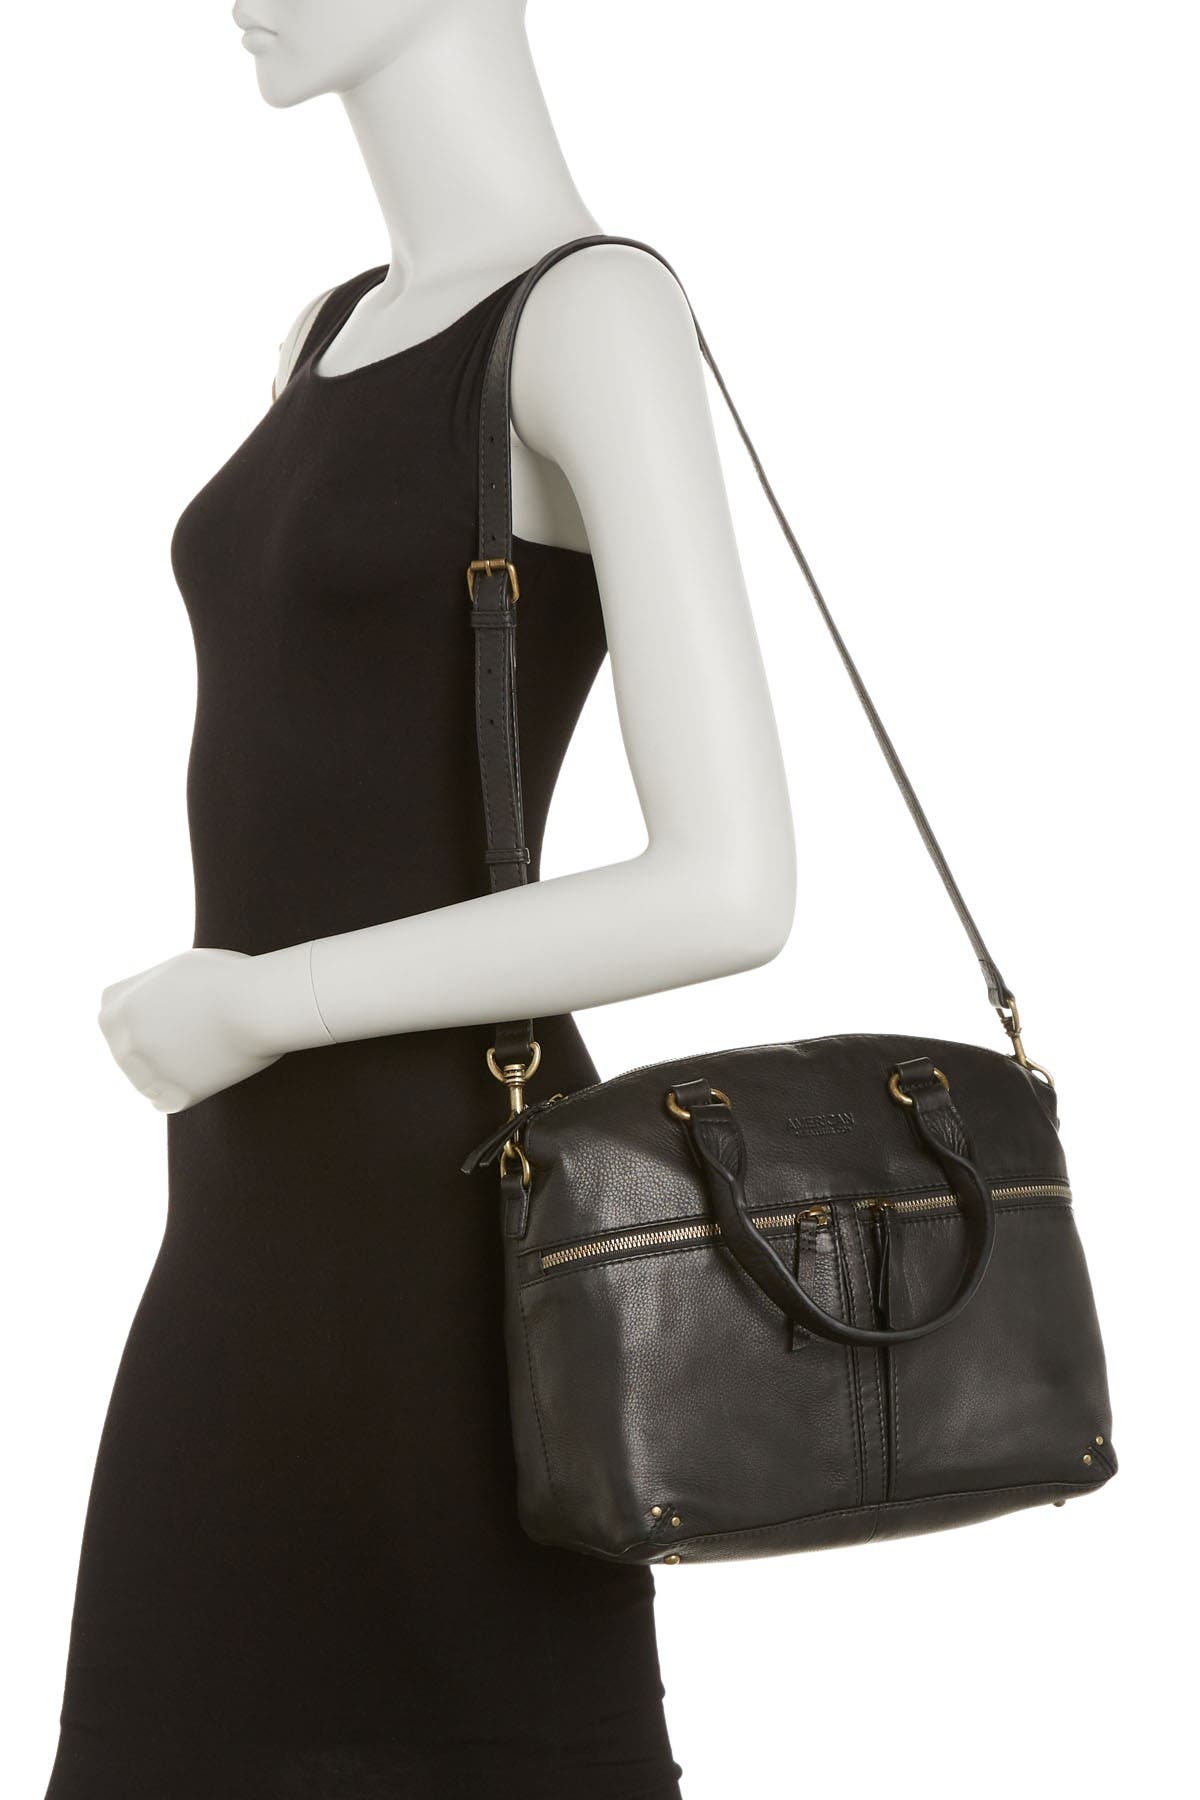 American Leather Co. Hanover Smooth Leather Satchel In Black Smooth